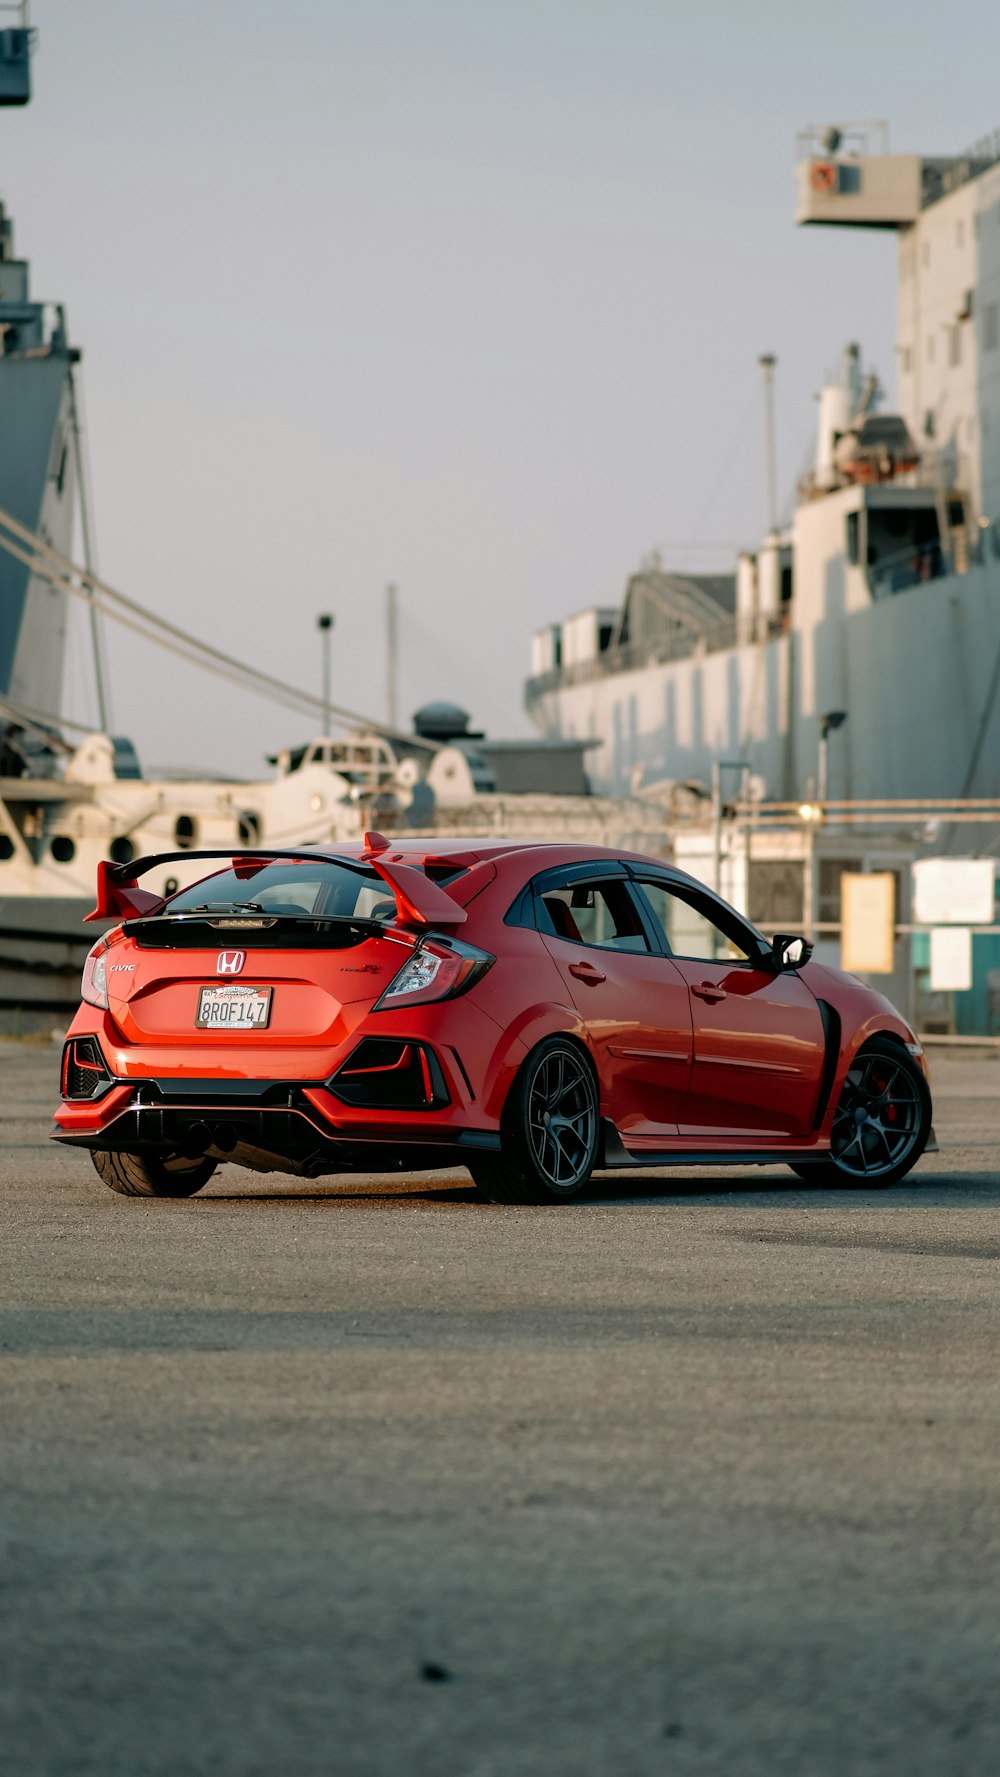 a red sports car parked in front of a ship